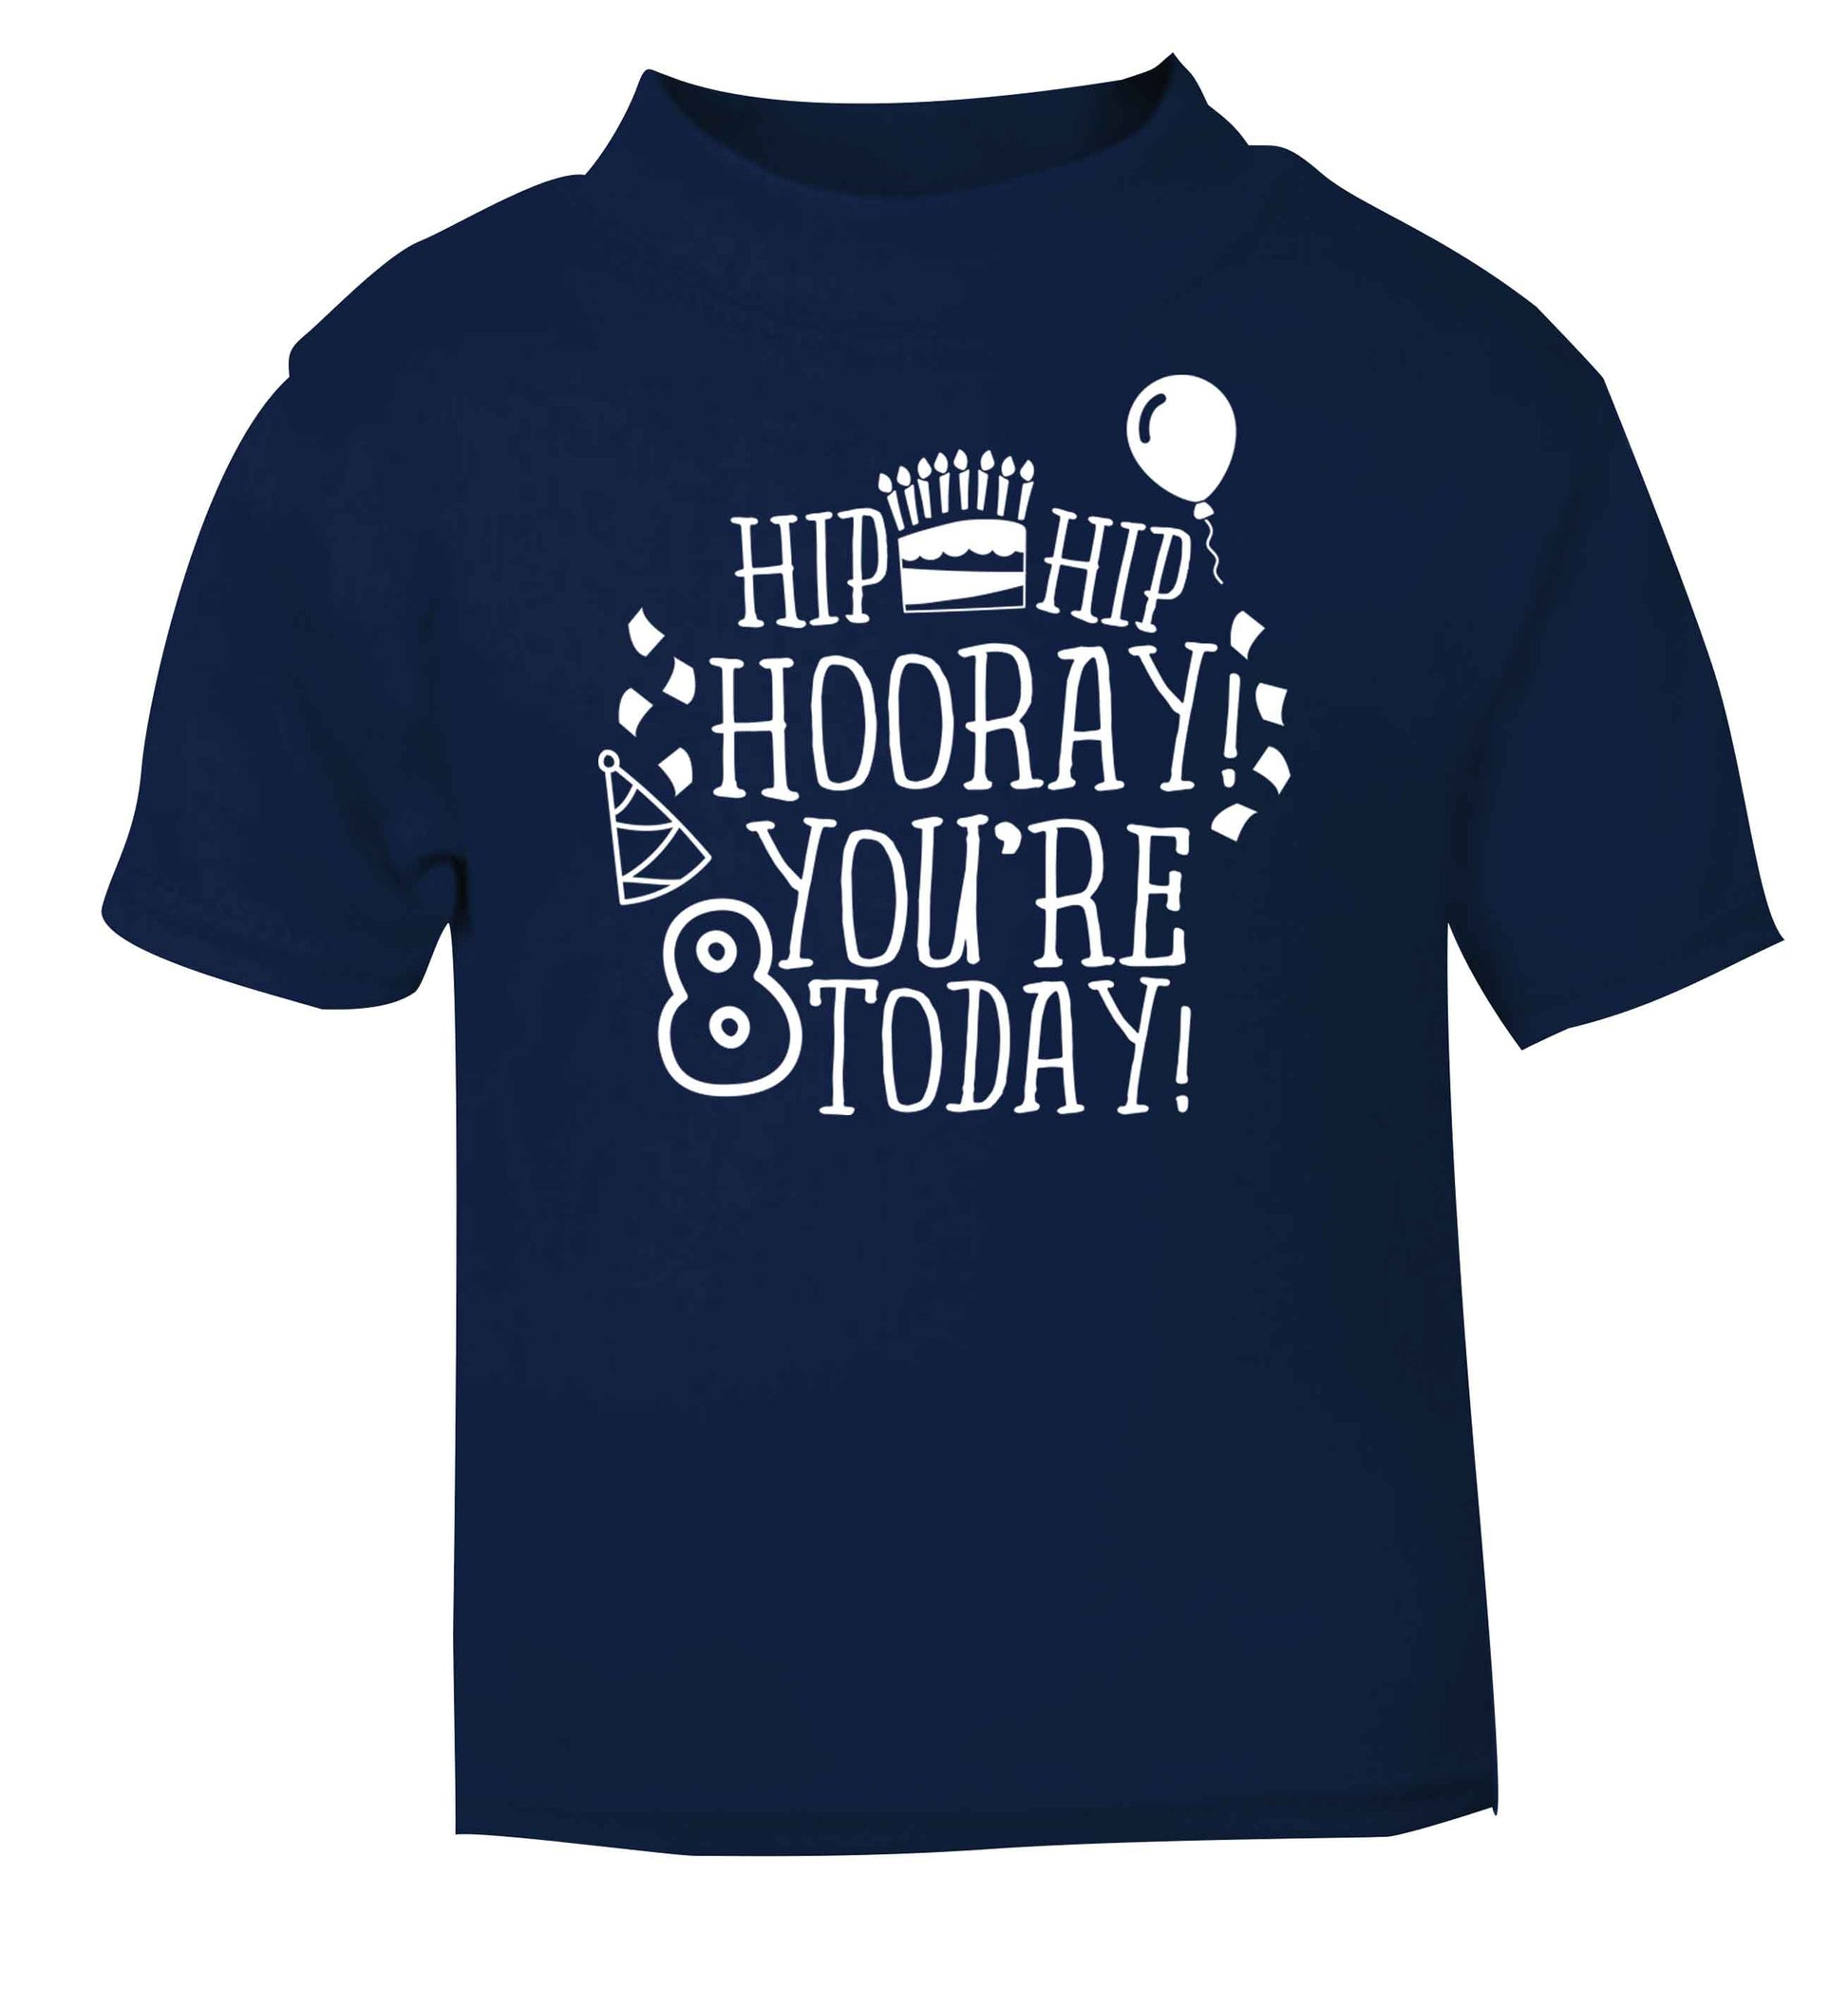 Hip hip hooray you're 8 today! navy baby toddler Tshirt 2 Years